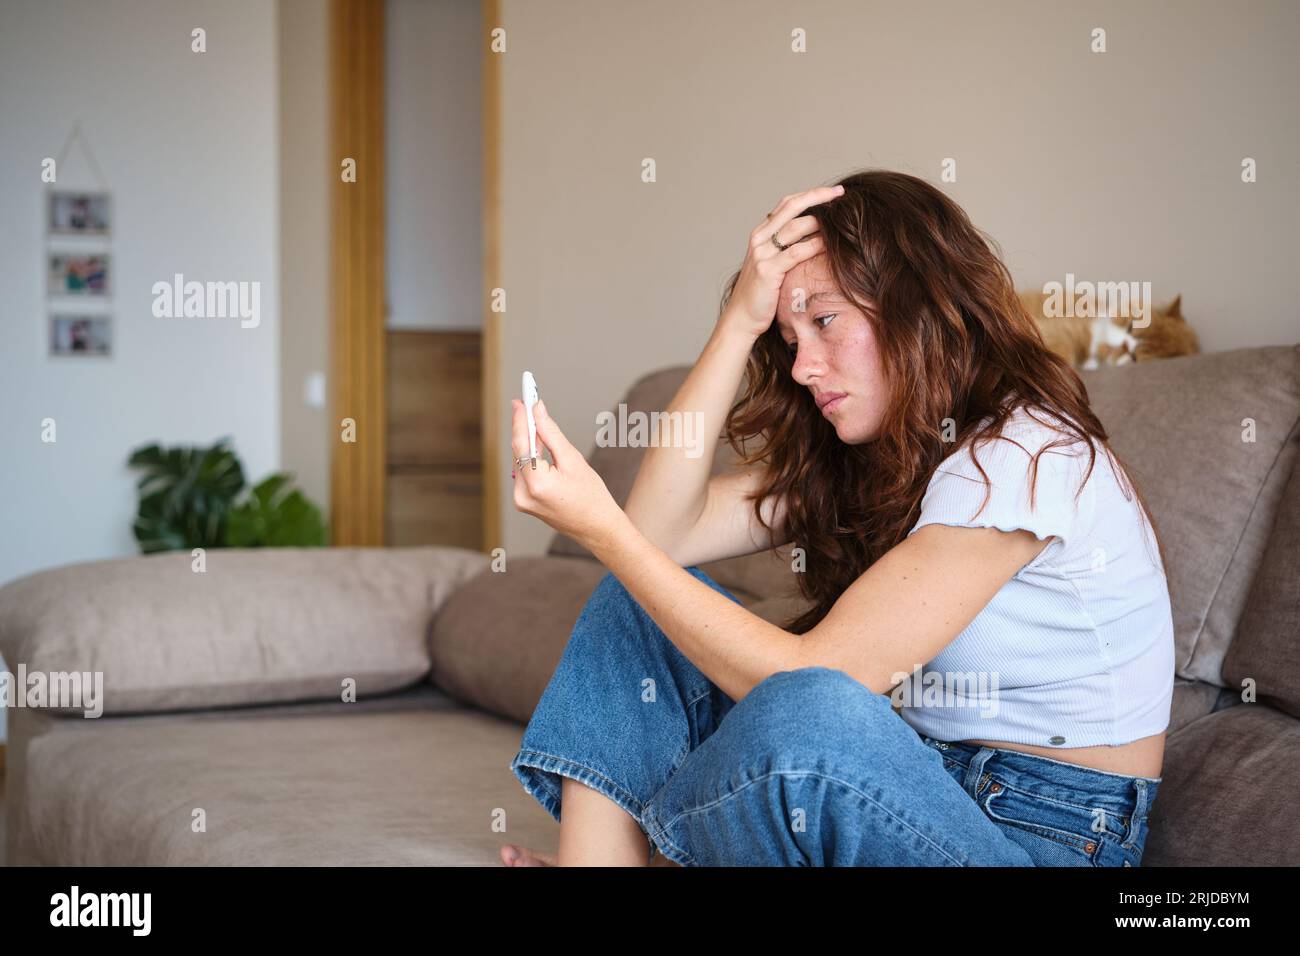 Sick woman holding thermometer sitting on the sofa Stock Photo